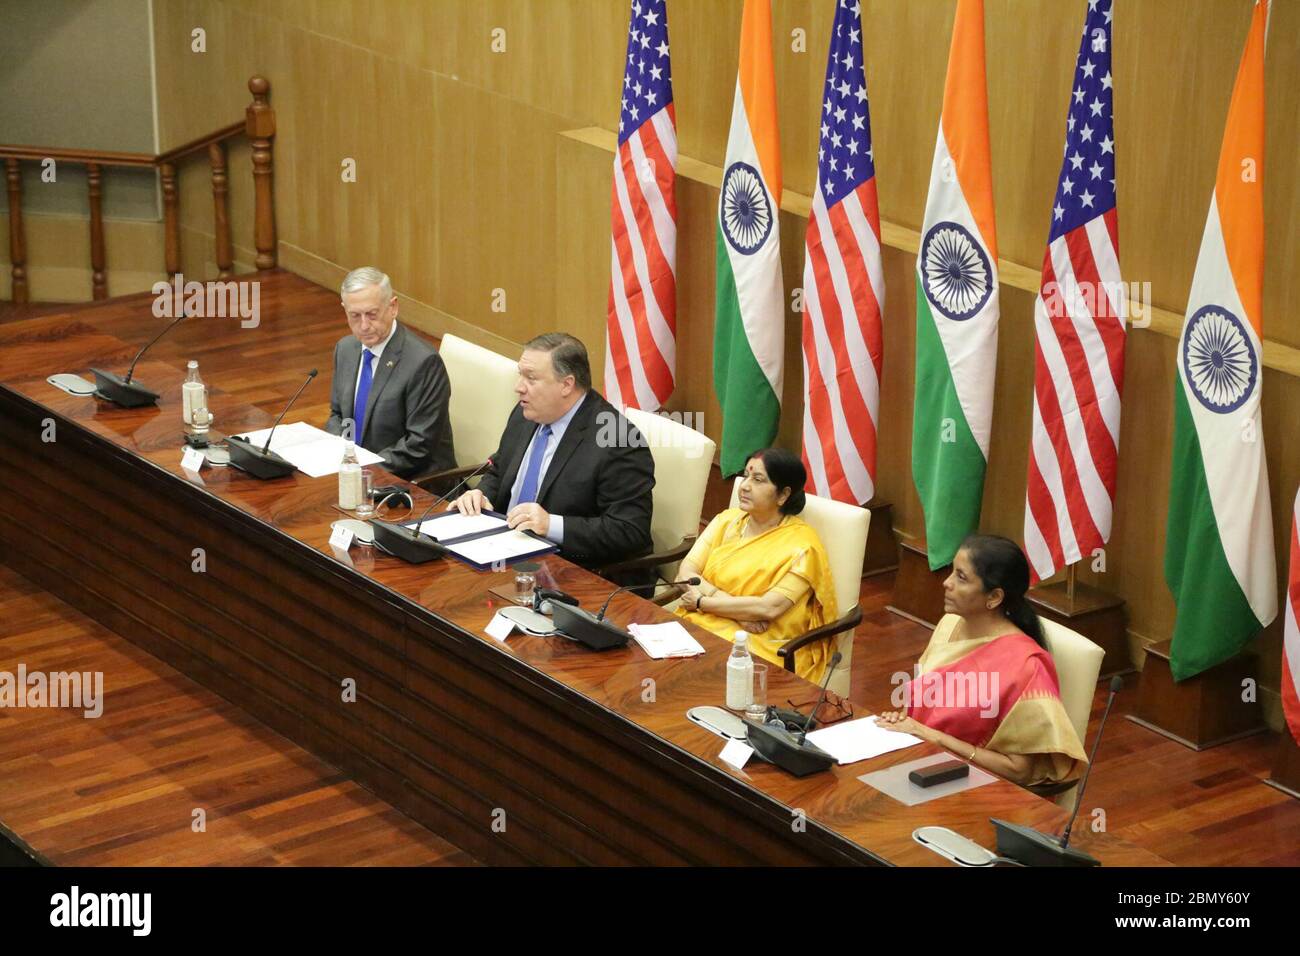 Secretary Pompeo Delivers Closing Remarks at the India 2+2 Dialogue U.S. Secretary of State Michael R. Pompeo flanked by U.S. Secretary of Defense Jim Mattis, Indian Minister of External Affairs Sushma Swaraj and Indian Defense Minister Nirmala Sitharaman delivers closing remarks at the 2+2 Dialogue, in New Delhi, India, September 6, 2018. Stock Photo